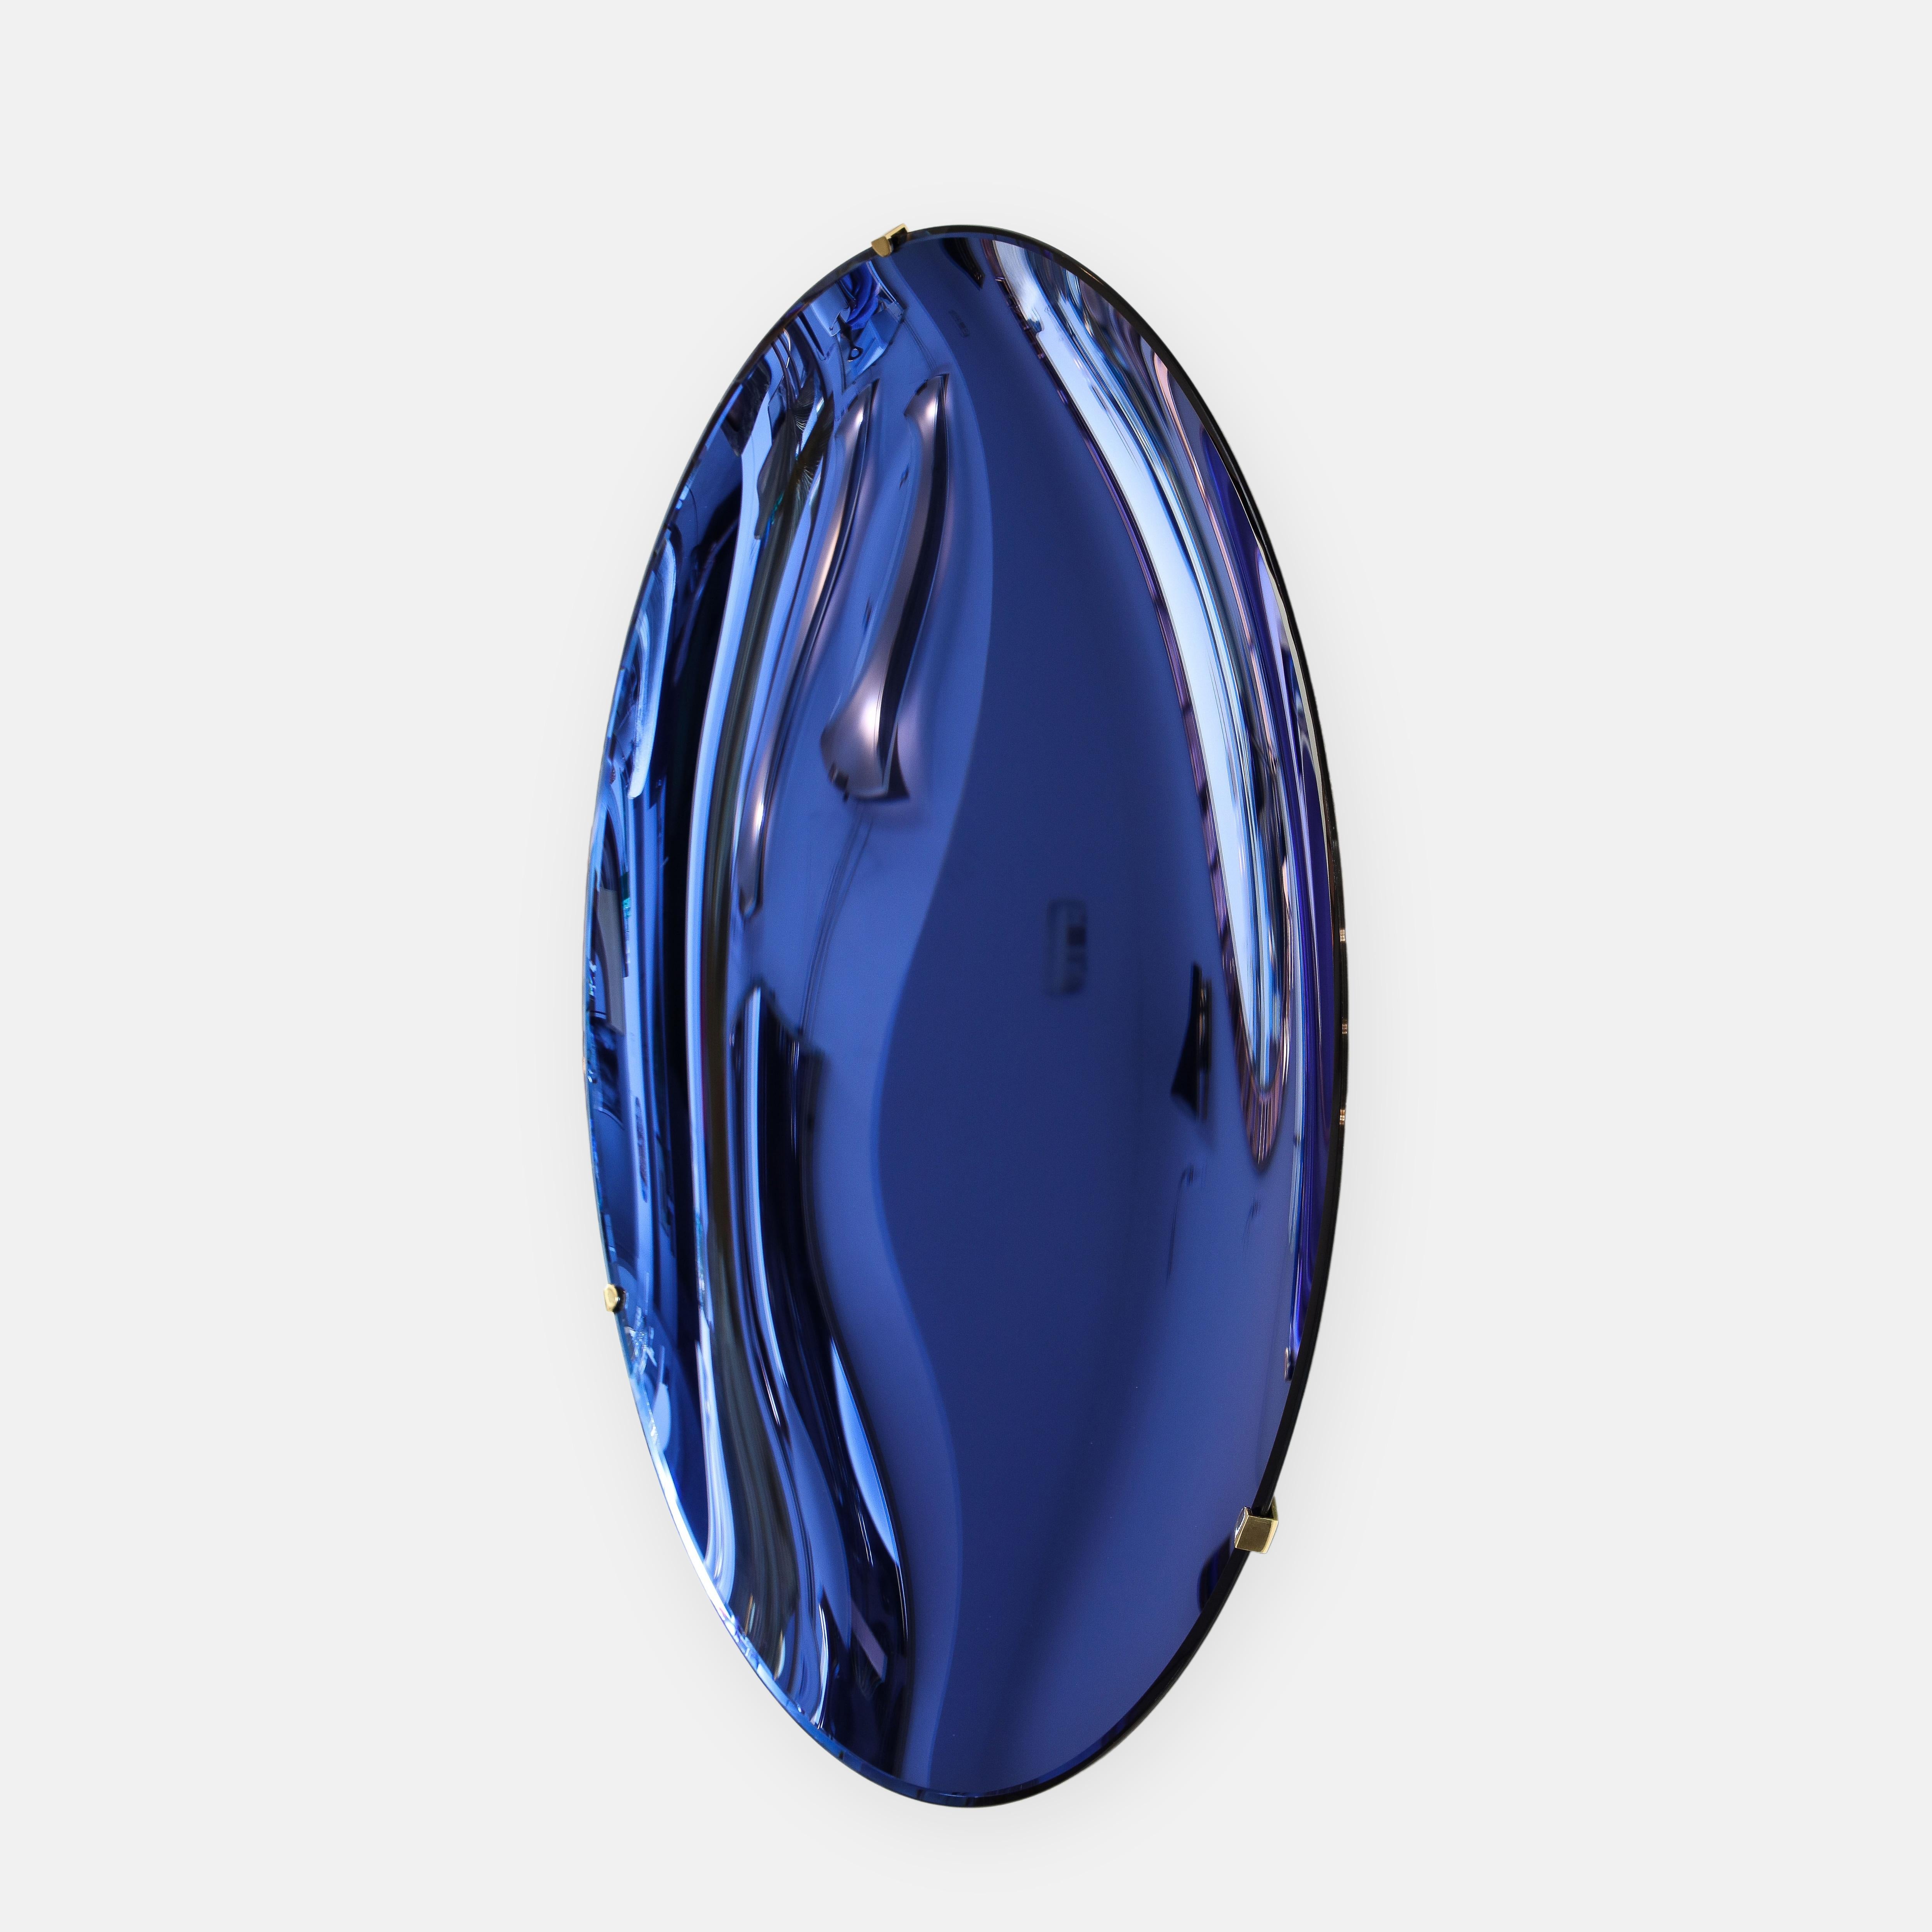 Effetto Vetro Contemporary Custom Sculptural Round Concave Mirror in Cobalt Blue In New Condition For Sale In New York, NY